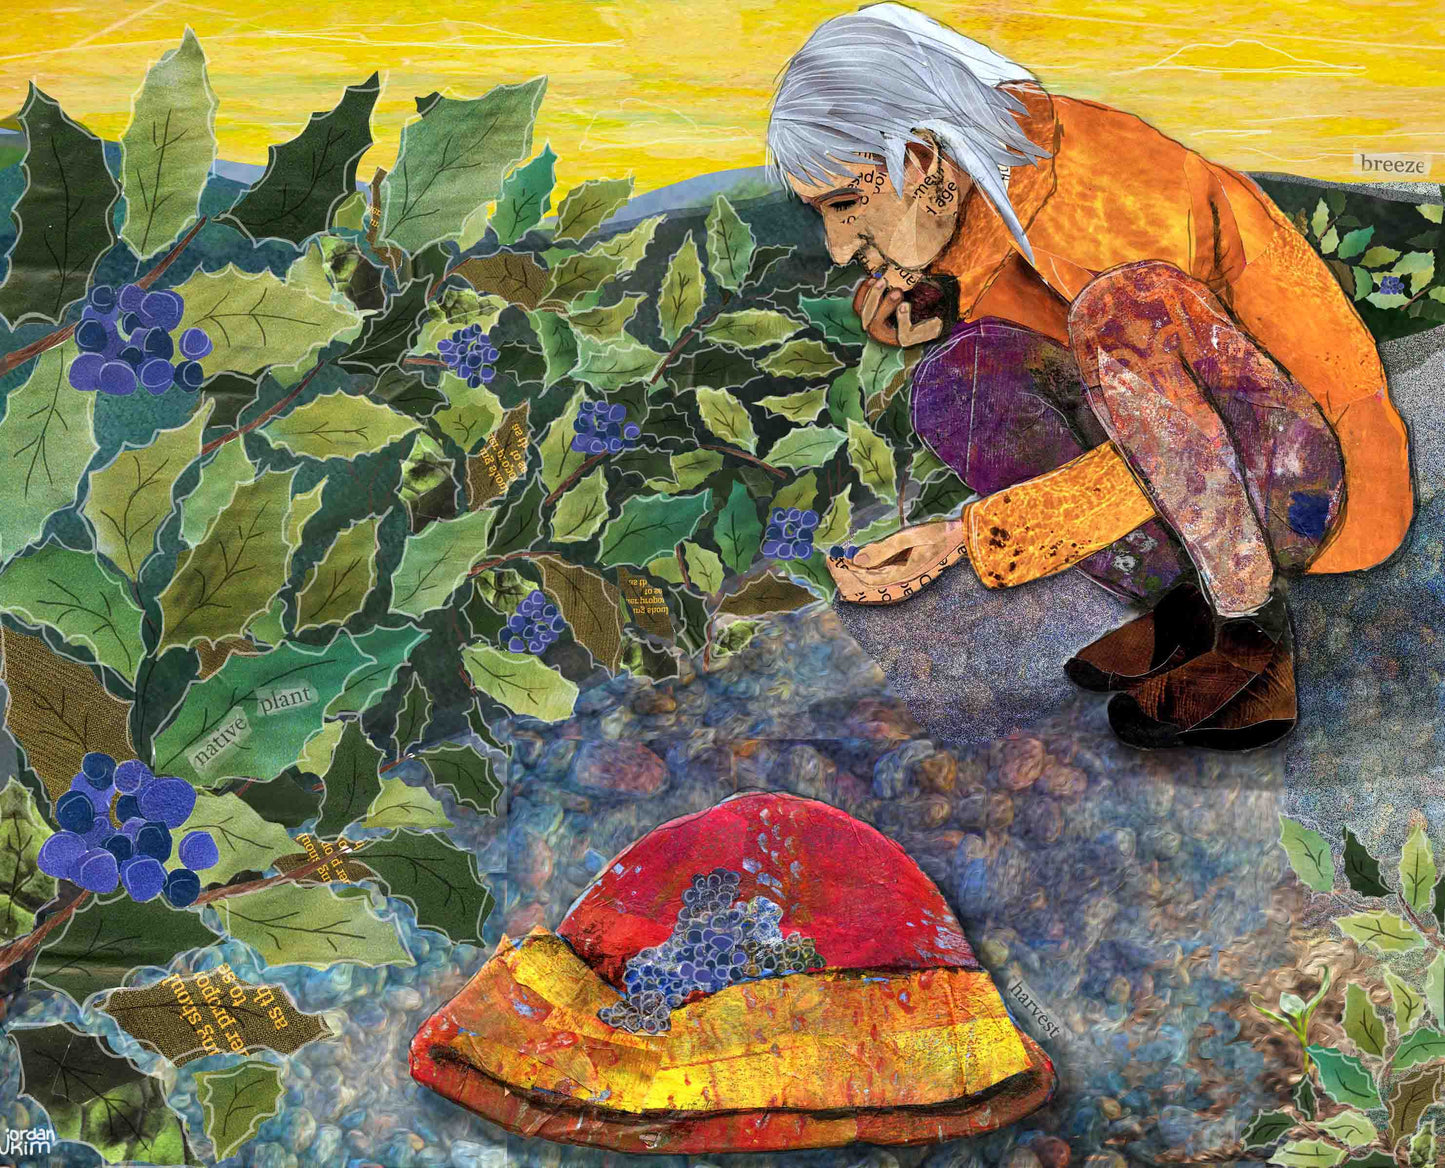 Greeting Card of a Paper Collage of Older Woman Gathering Oregon Grape Berries in a Hat - Blank Inside